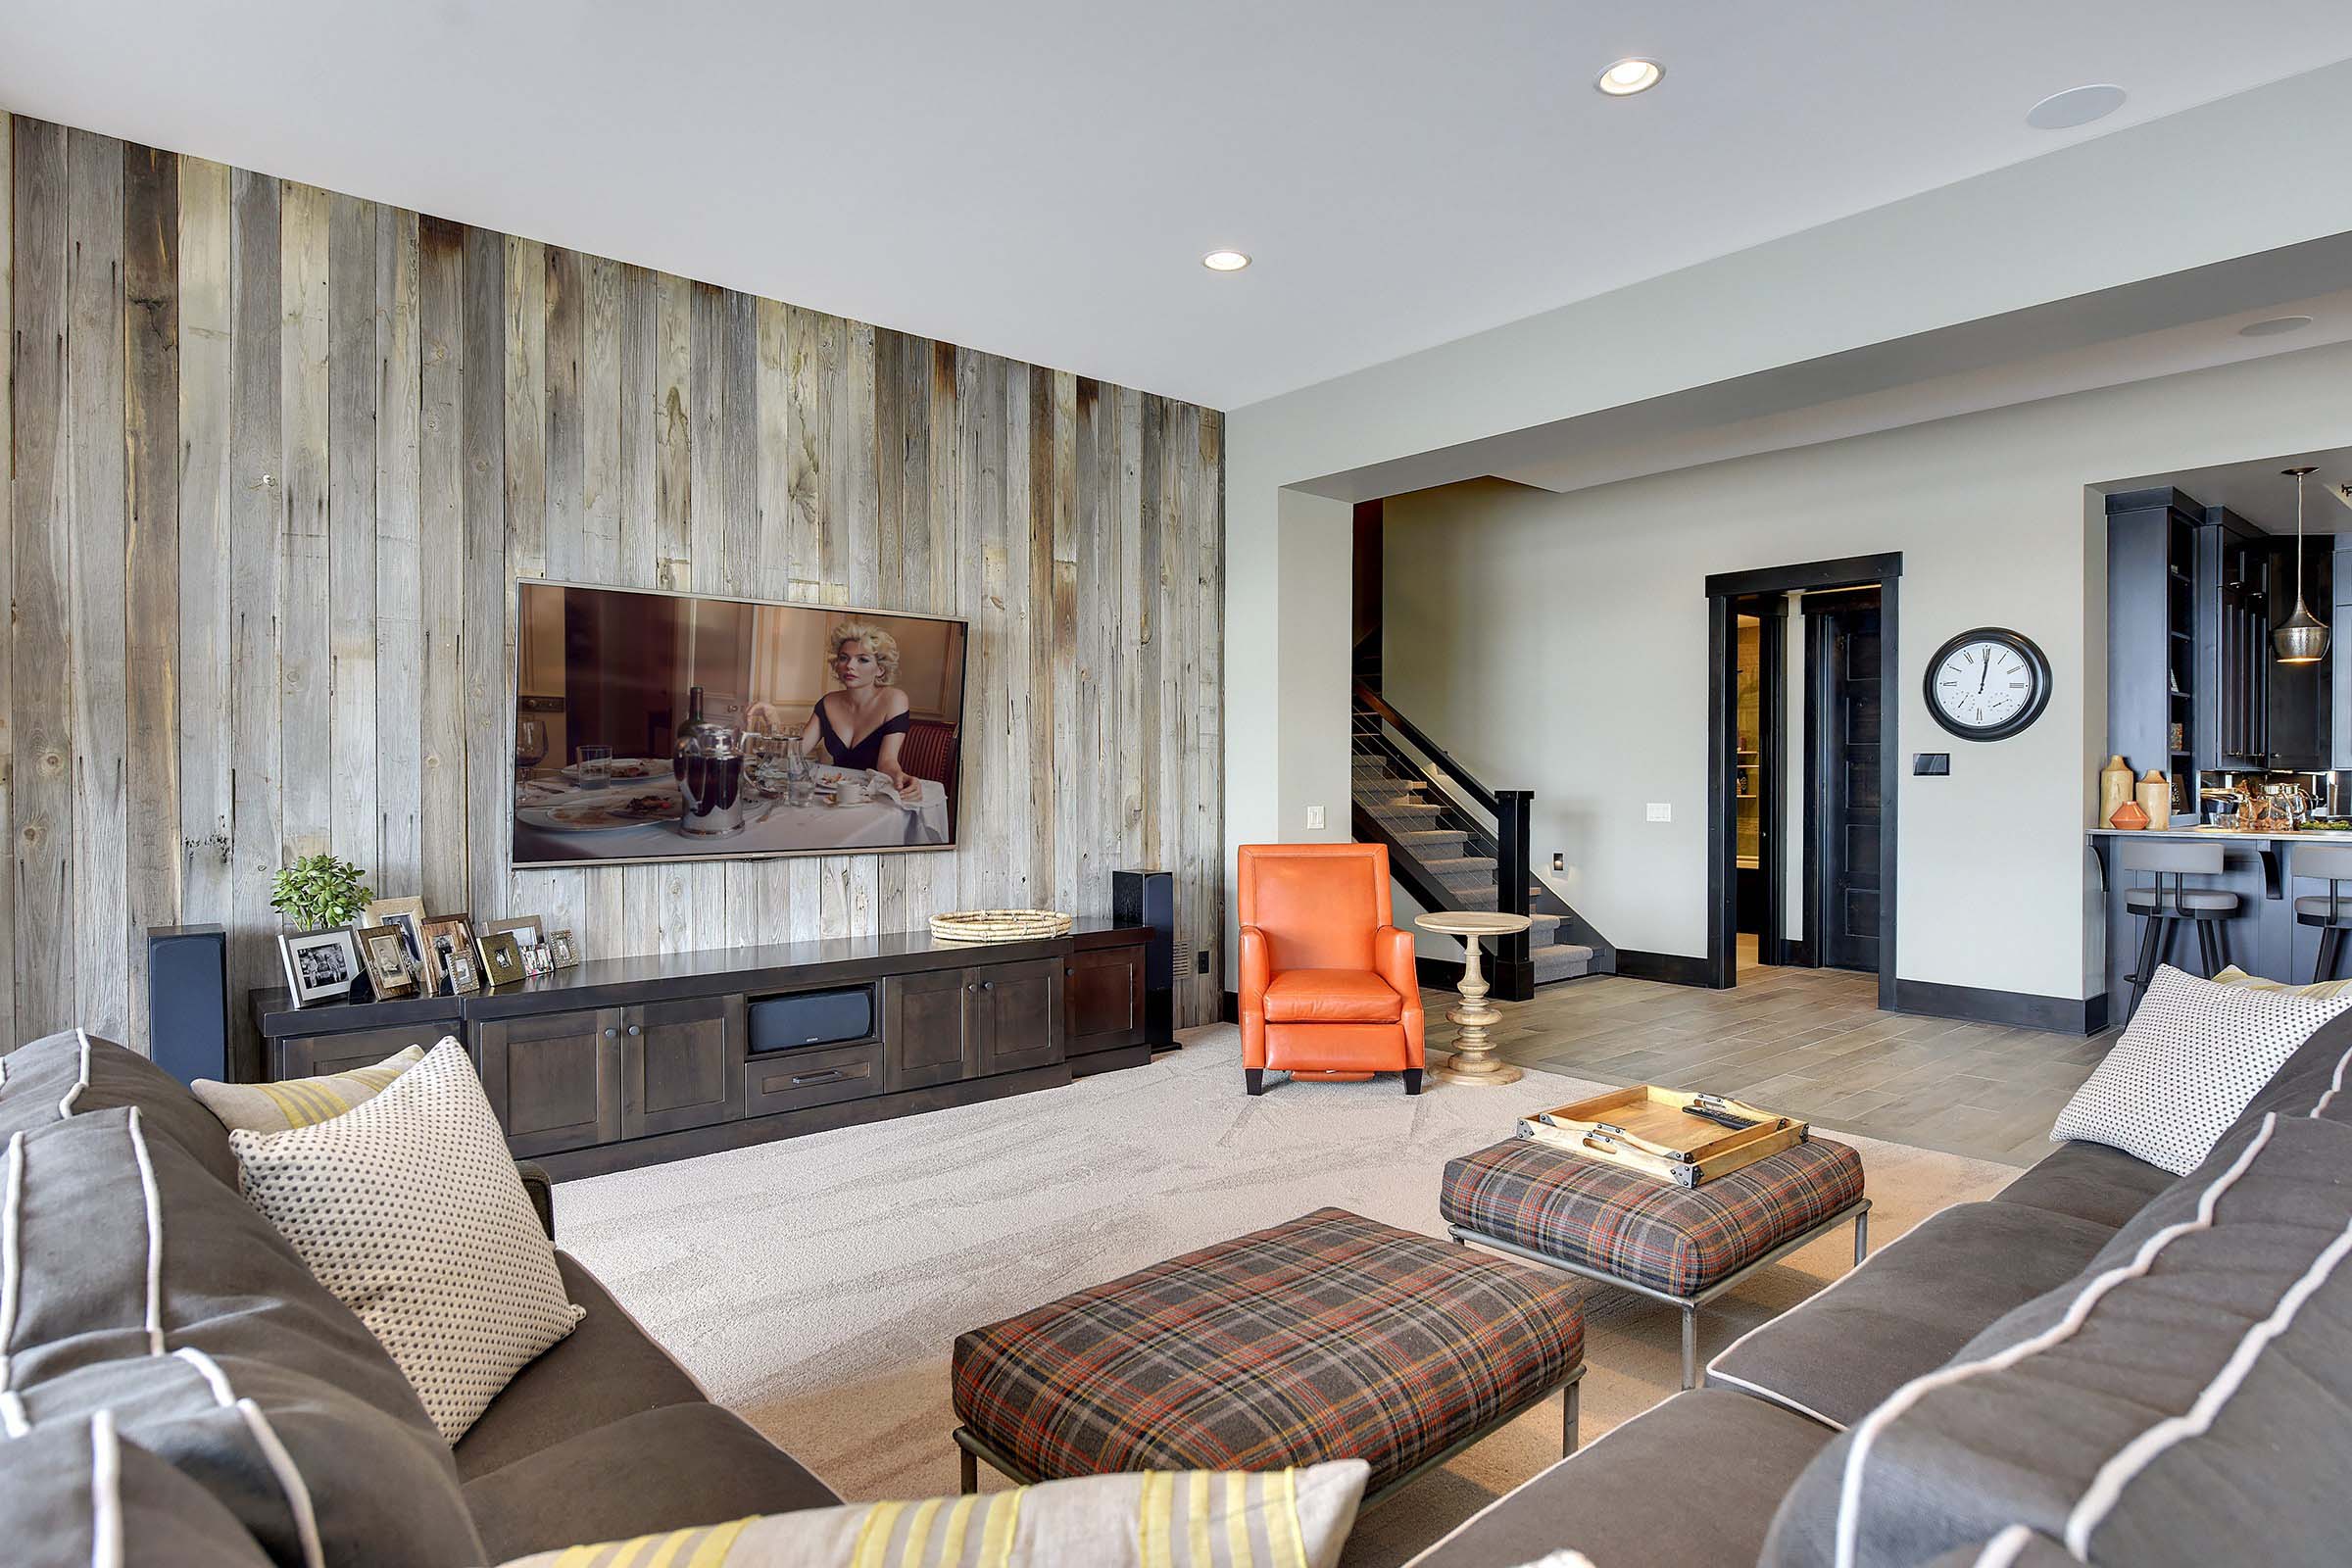 A living room with wood paneling and a flat screen tv, featured in our portfolio.